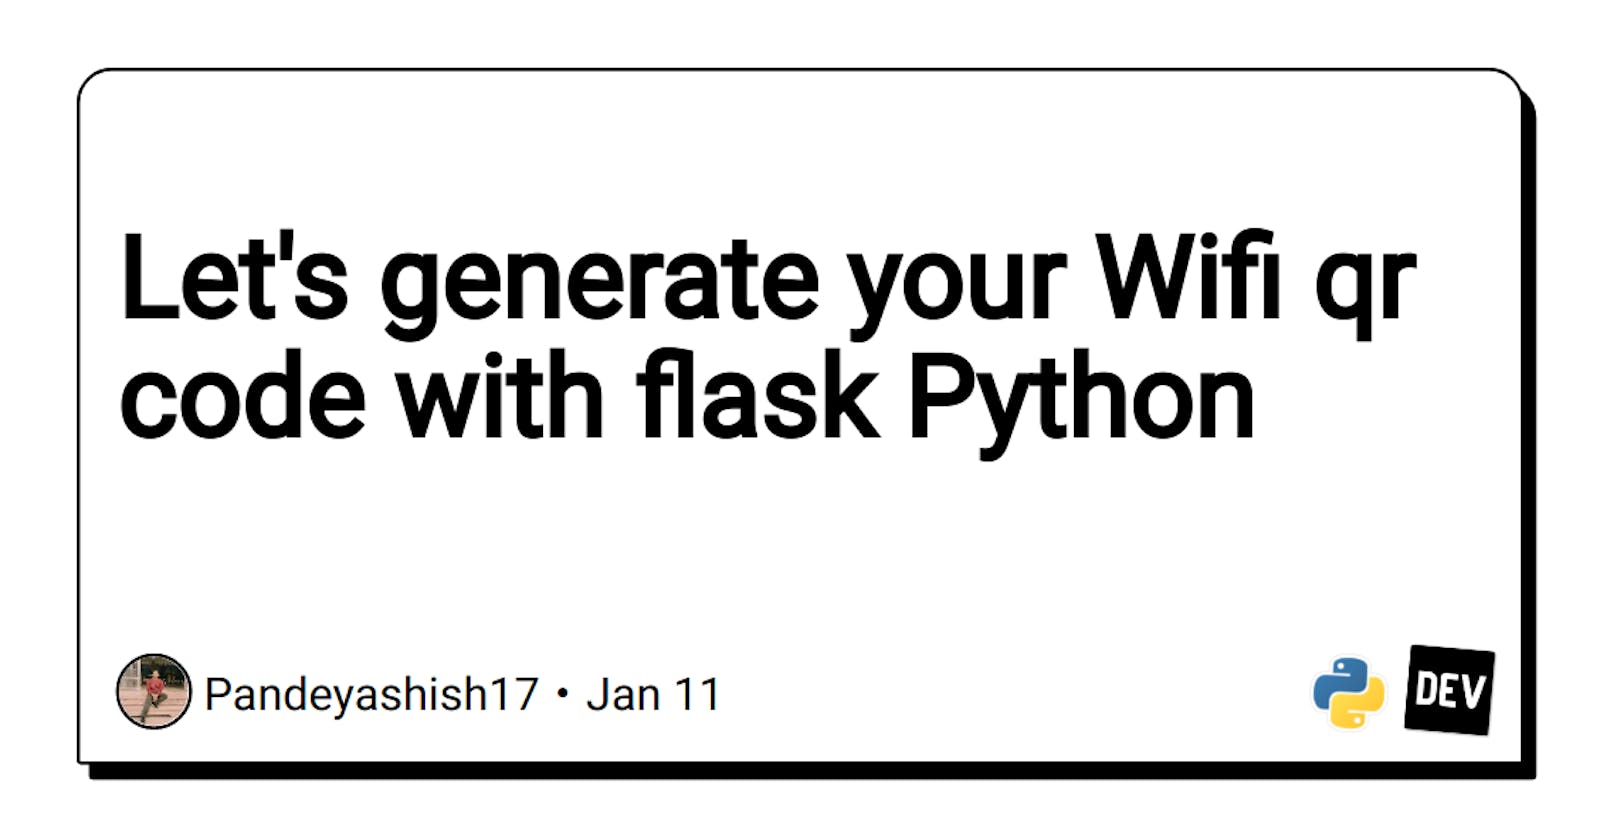 Let's generate your Wifi qr code with flask Python